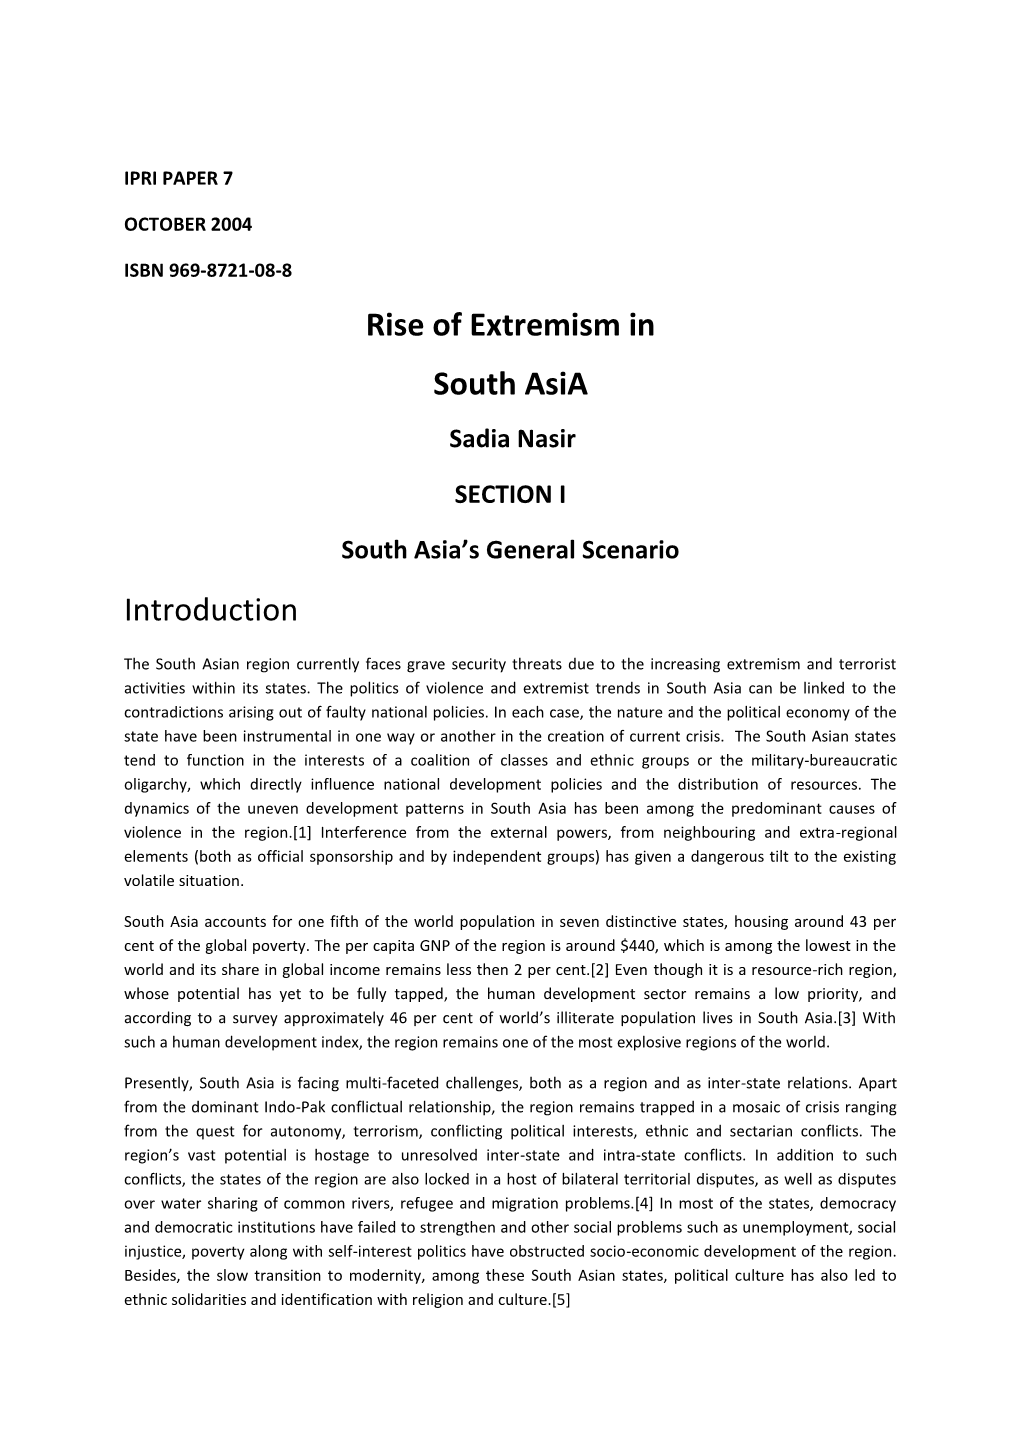 Rise of Extremism in South Asia Introduction